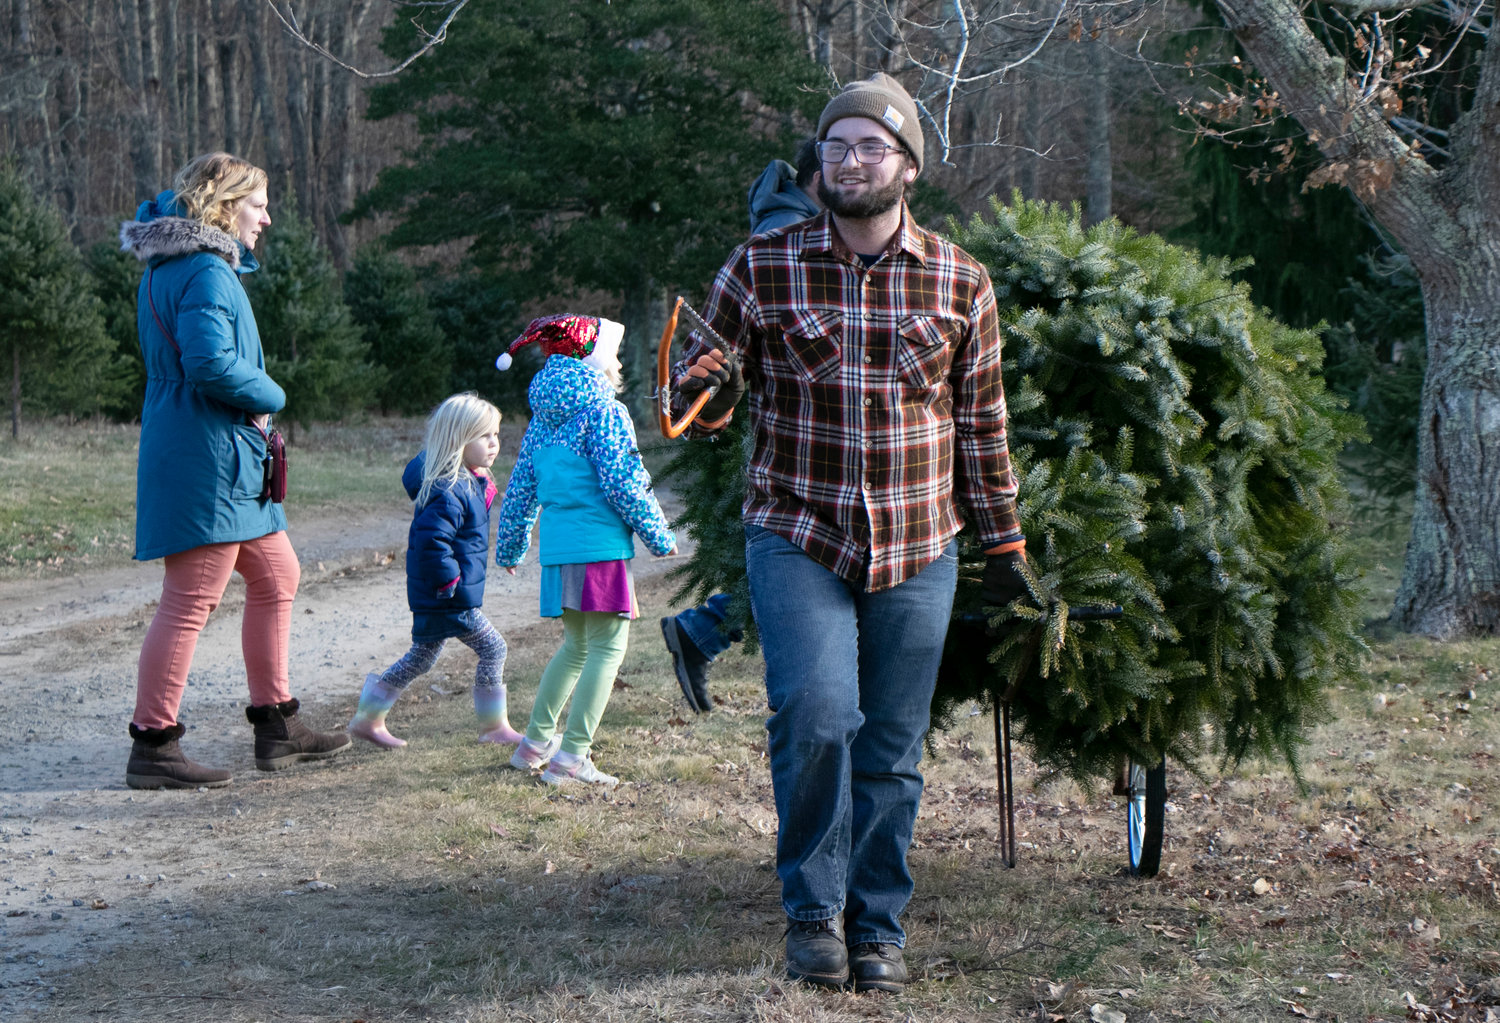 Travis Perry, who owns the Bay State Beef Company in Westport, helped bag trees for the family this first year.